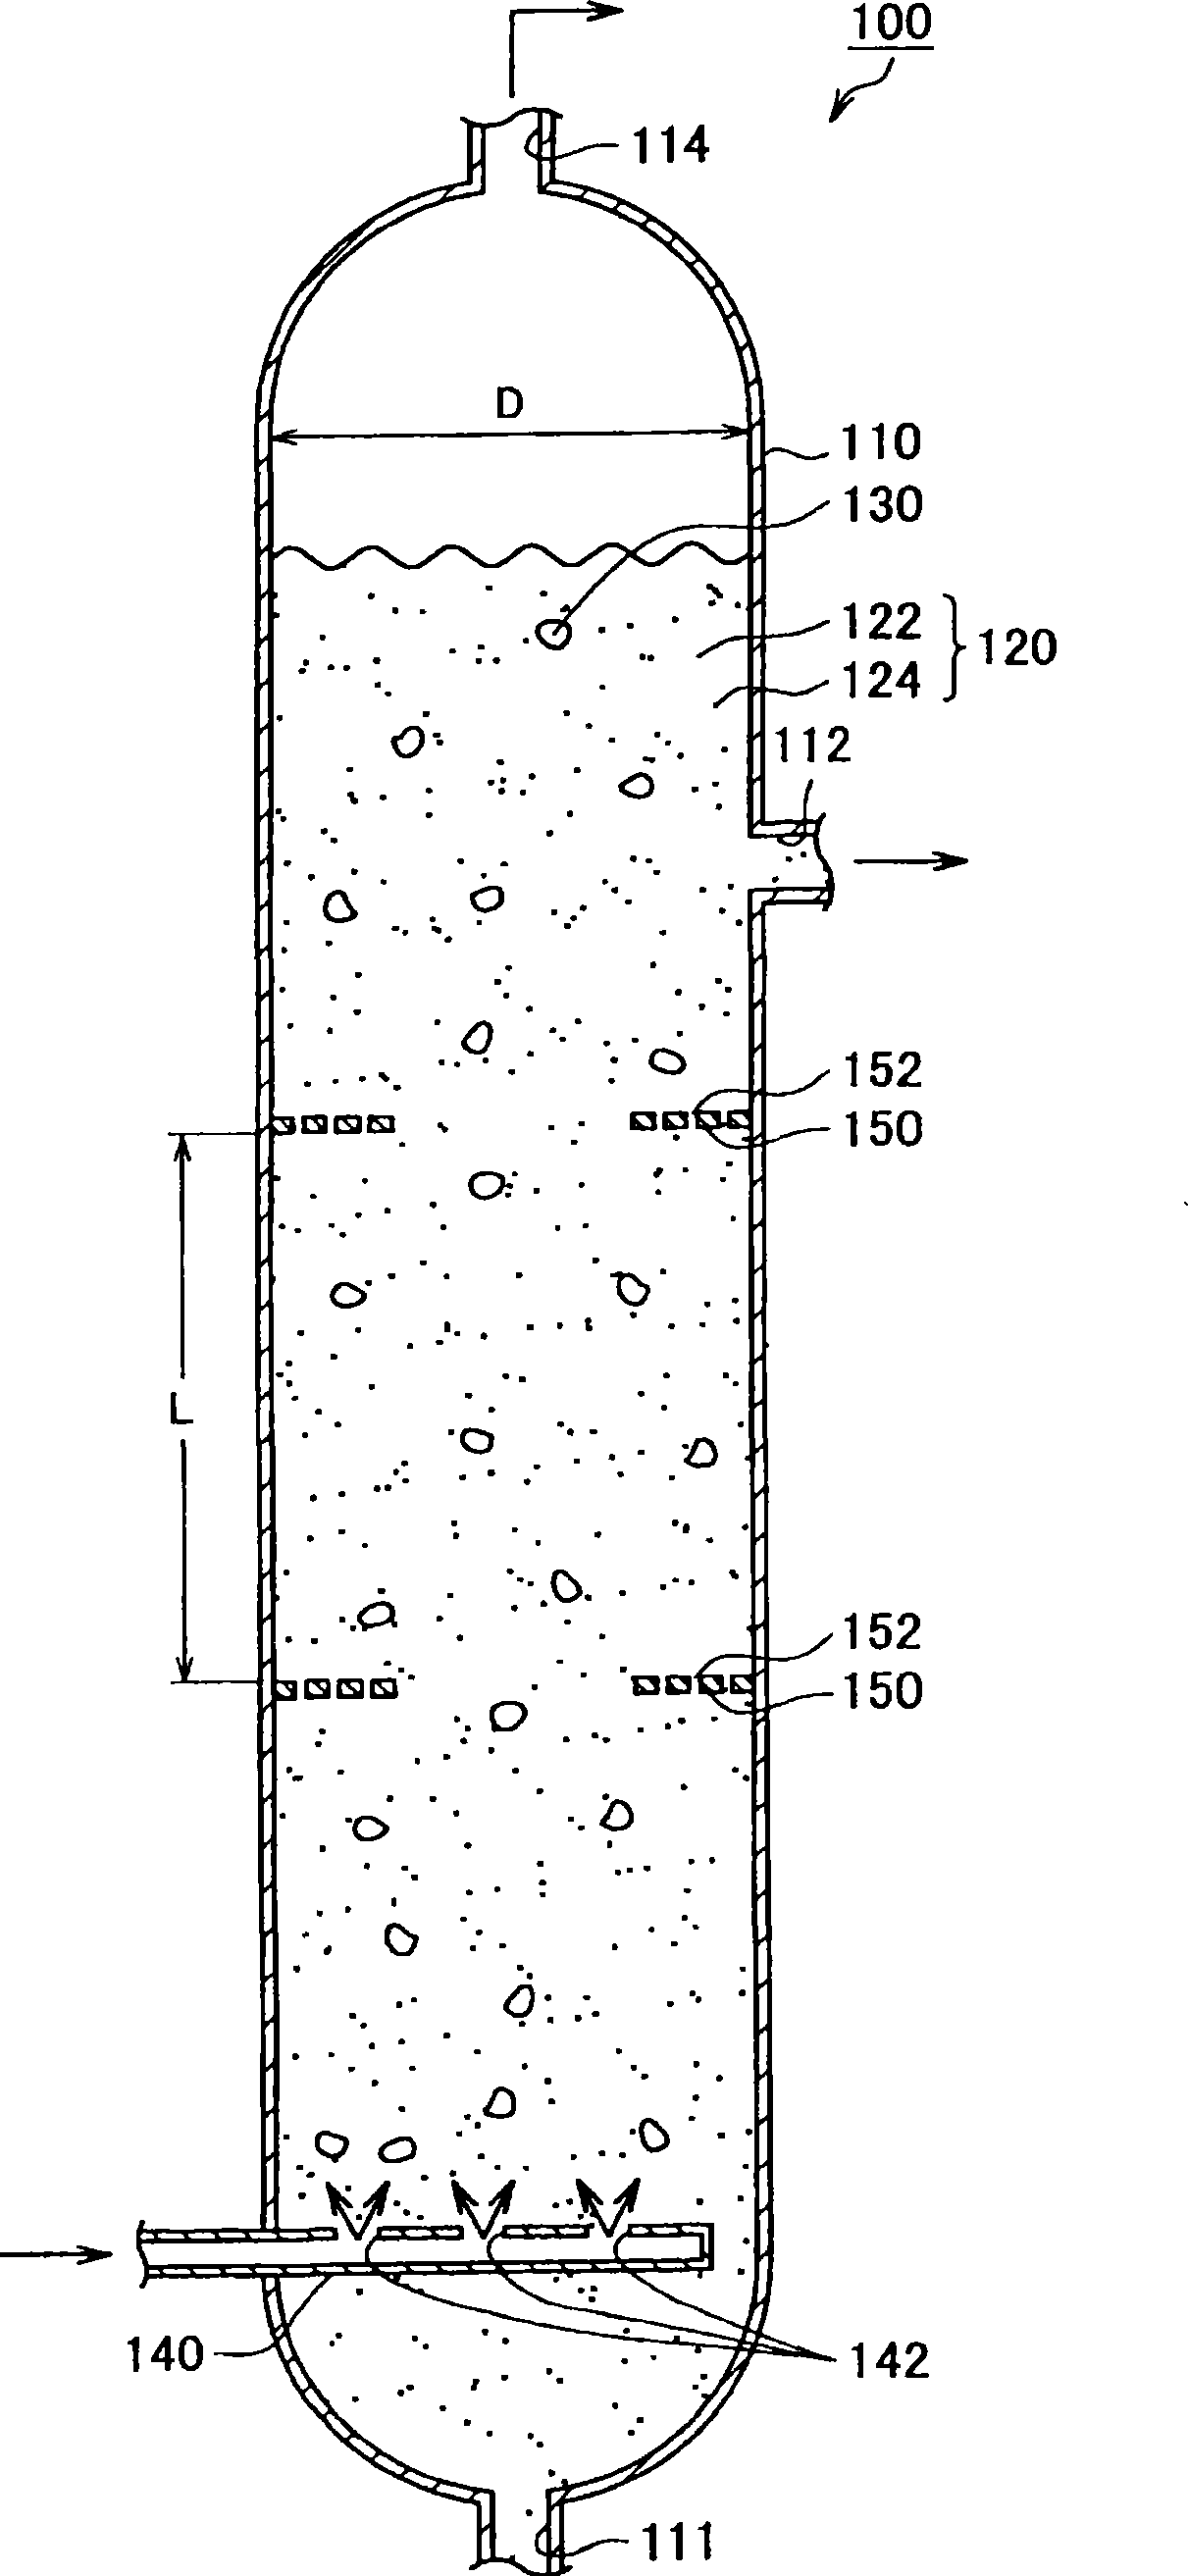 Bubble tower type hydrocarbon synthesis reactor